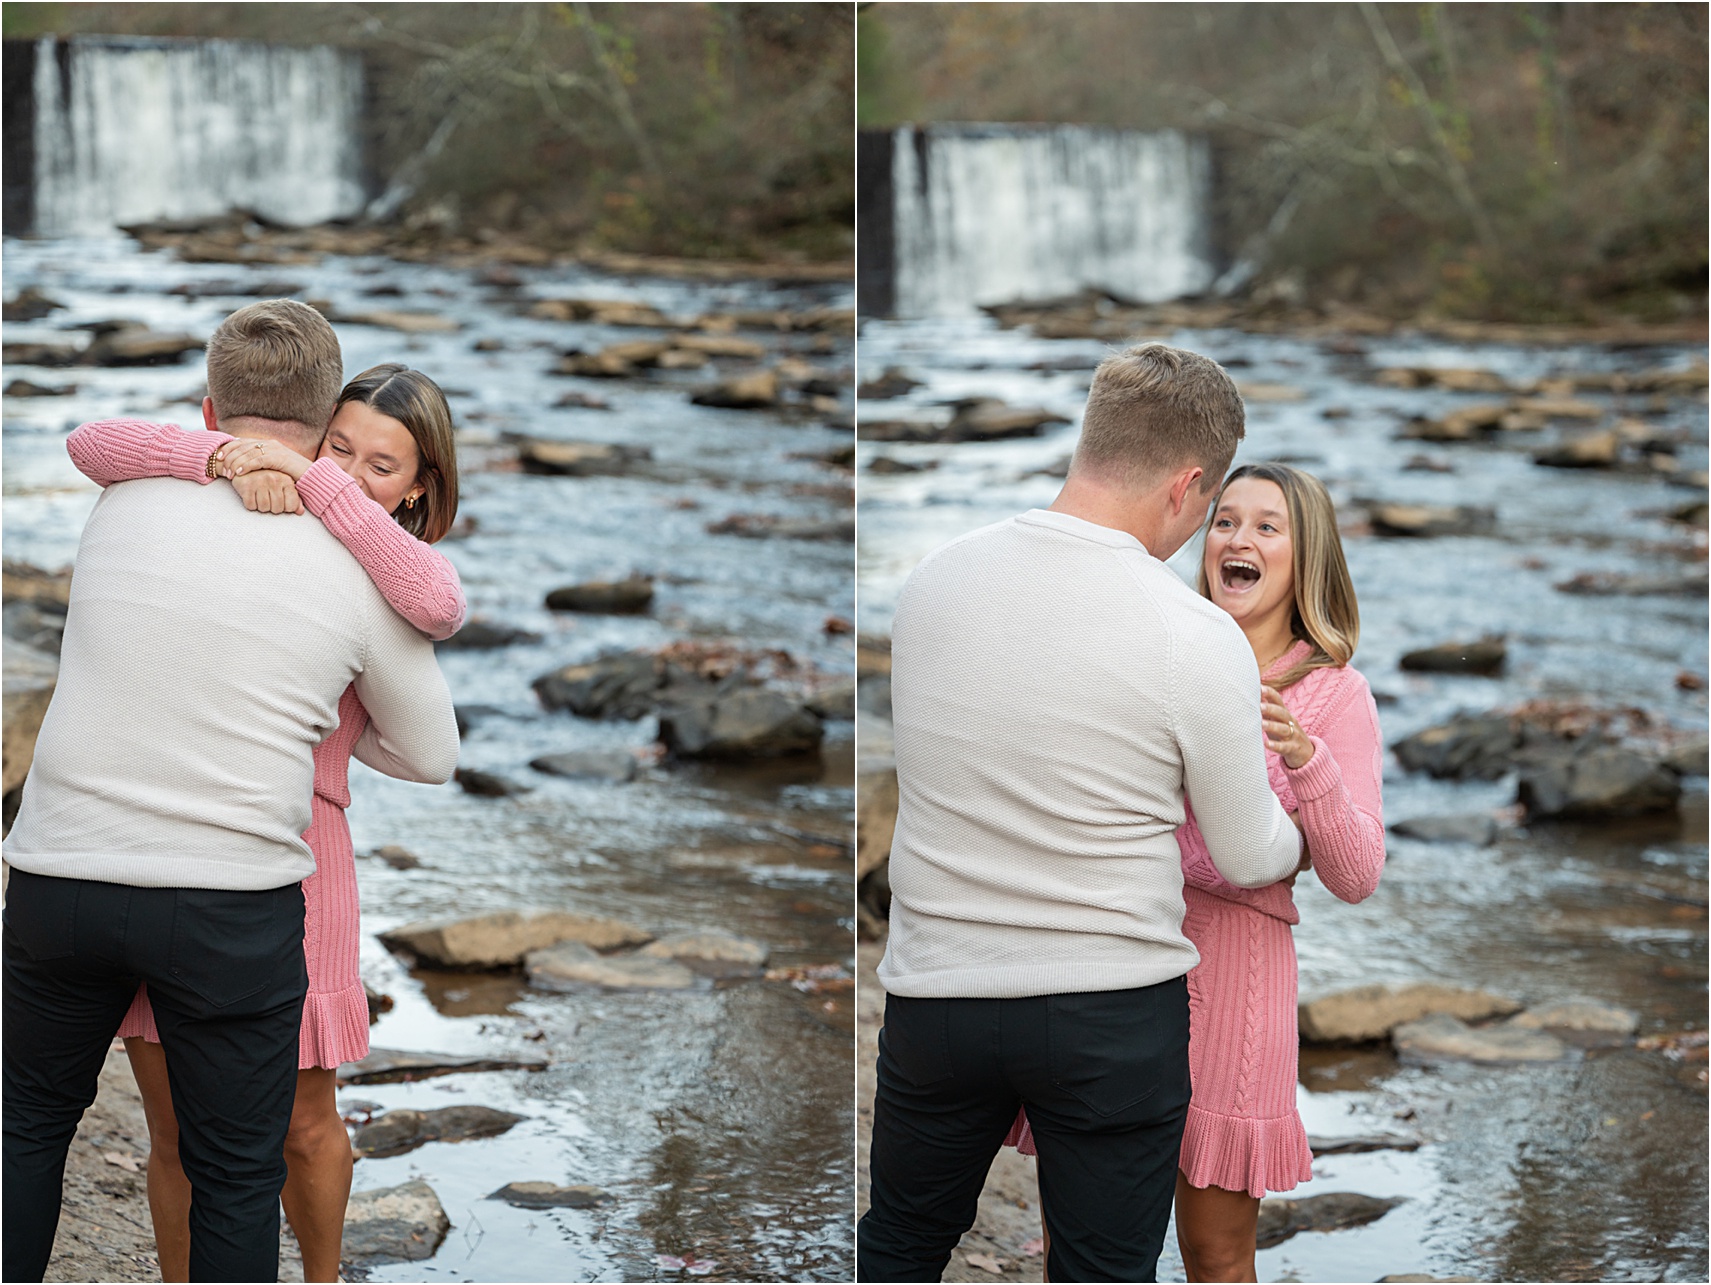 Roswell Mill proposal, Roswell Mill proposal photographer, Roswell Mill proposal photography, Roswell wedding photographer, Roswell wedding photography, Atlanta proposal photographer, Atlanta proposal photography, Atlanta proposal